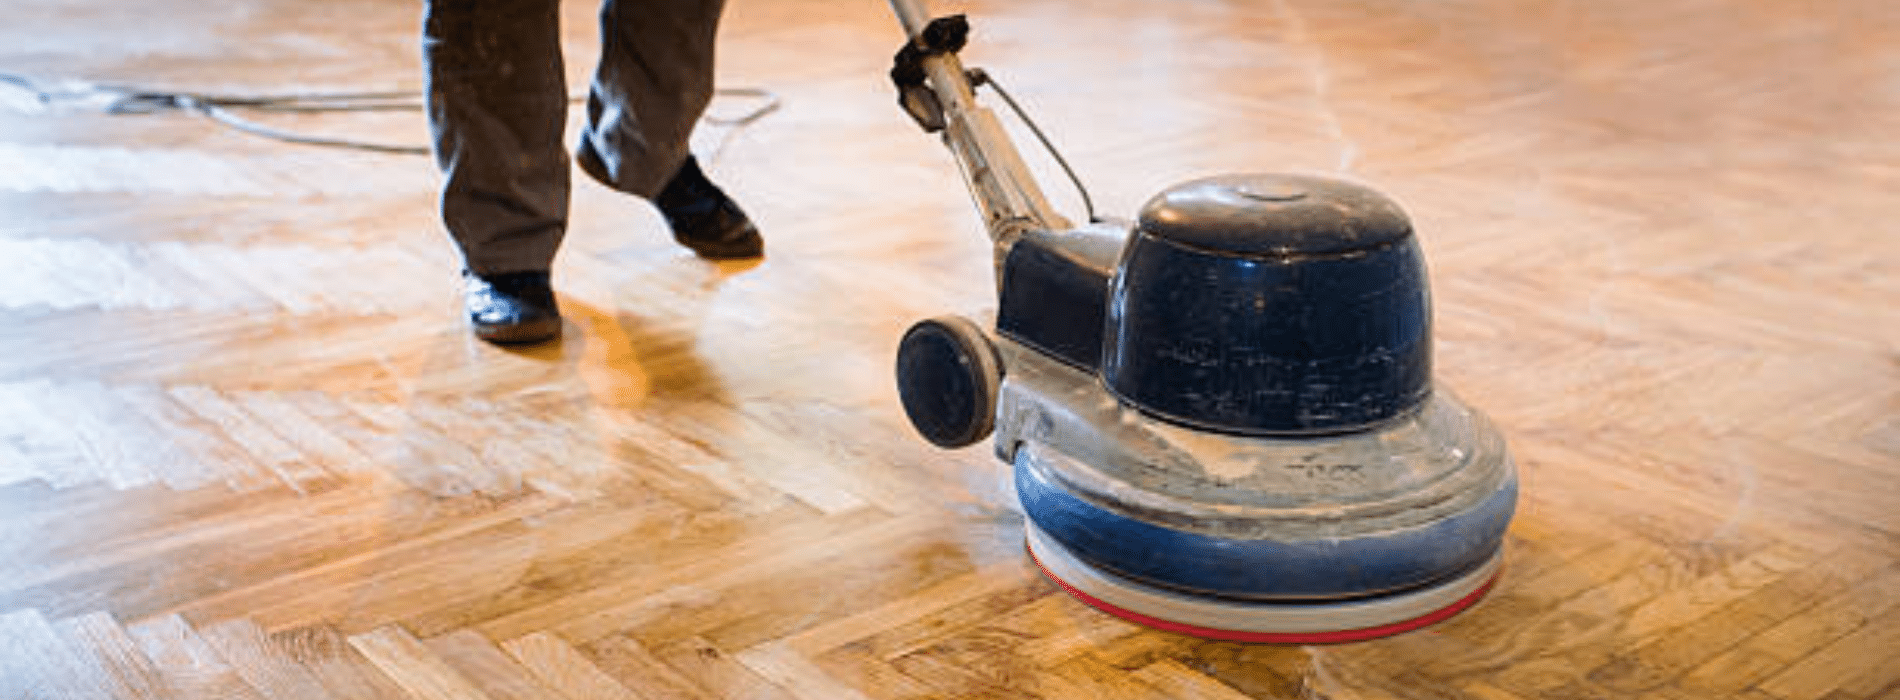 Mr Sander® working on a hardwood floor in Brick Lane, E1 with a 2.2kW, 220V Bona buffer sander. The team's dedication to delivering top-notch floor restoration outcomes is demonstrated by the HEPA-filtered dust extraction system, which guarantees a clean, effective sanding operation.